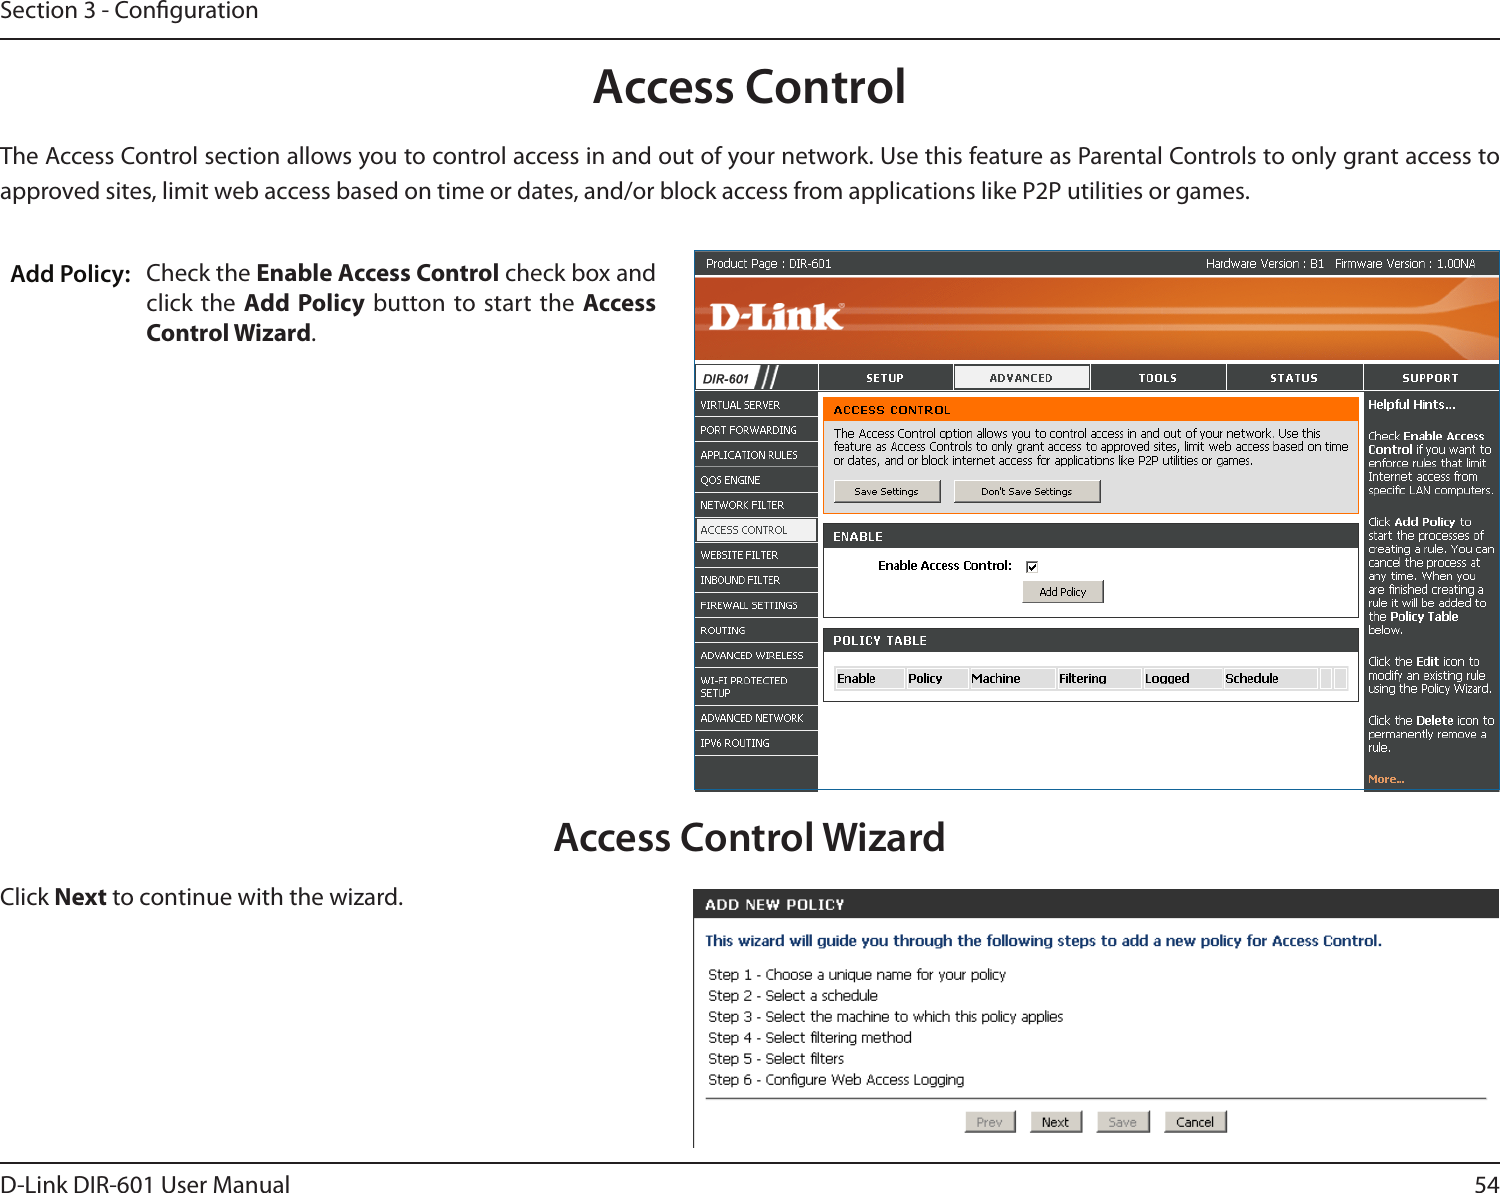 54D-Link DIR-601 User ManualSection 3 - CongurationAccess ControlCheck the Enable Access Control check box and click the  Add Policy  button to start the  Access Control Wizard. Add Policy:The Access Control section allows you to control access in and out of your network. Use this feature as Parental Controls to only grant access to approved sites, limit web access based on time or dates, and/or block access from applications like P2P utilities or games.Click Next to continue with the wizard.Access Control Wizard